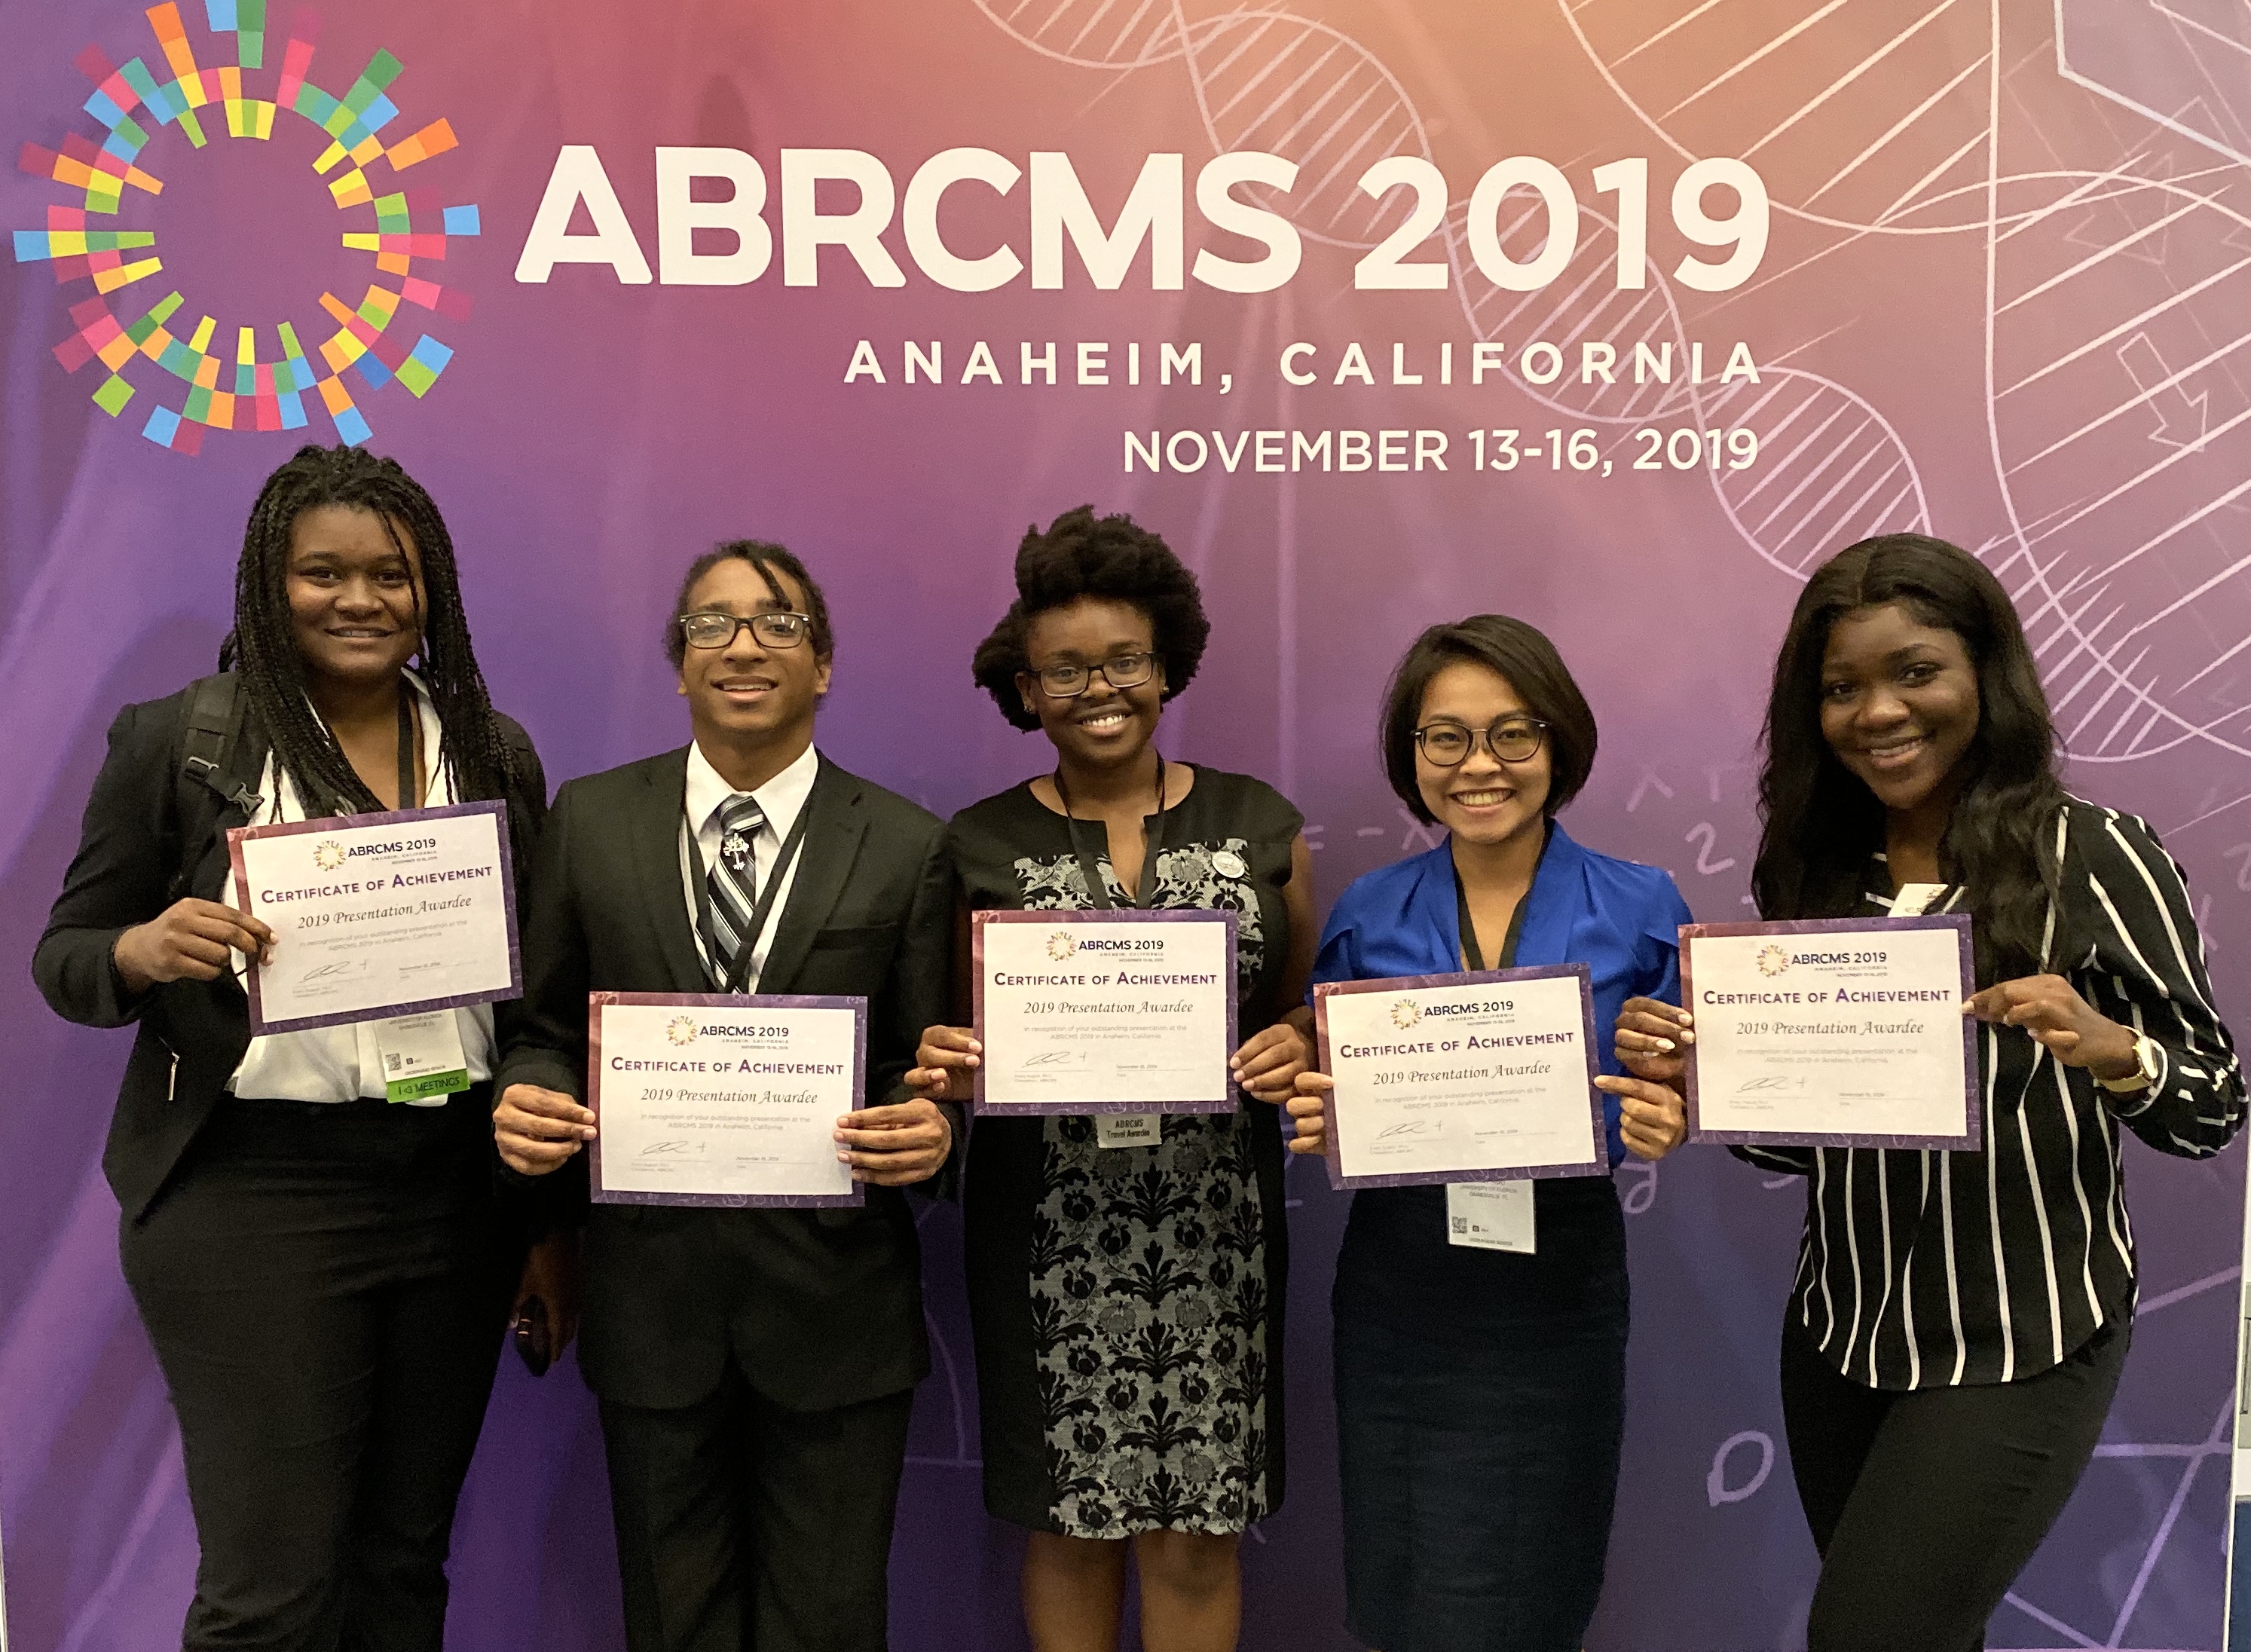 Annual Biomedical Research Conference for Minority Students Awardees